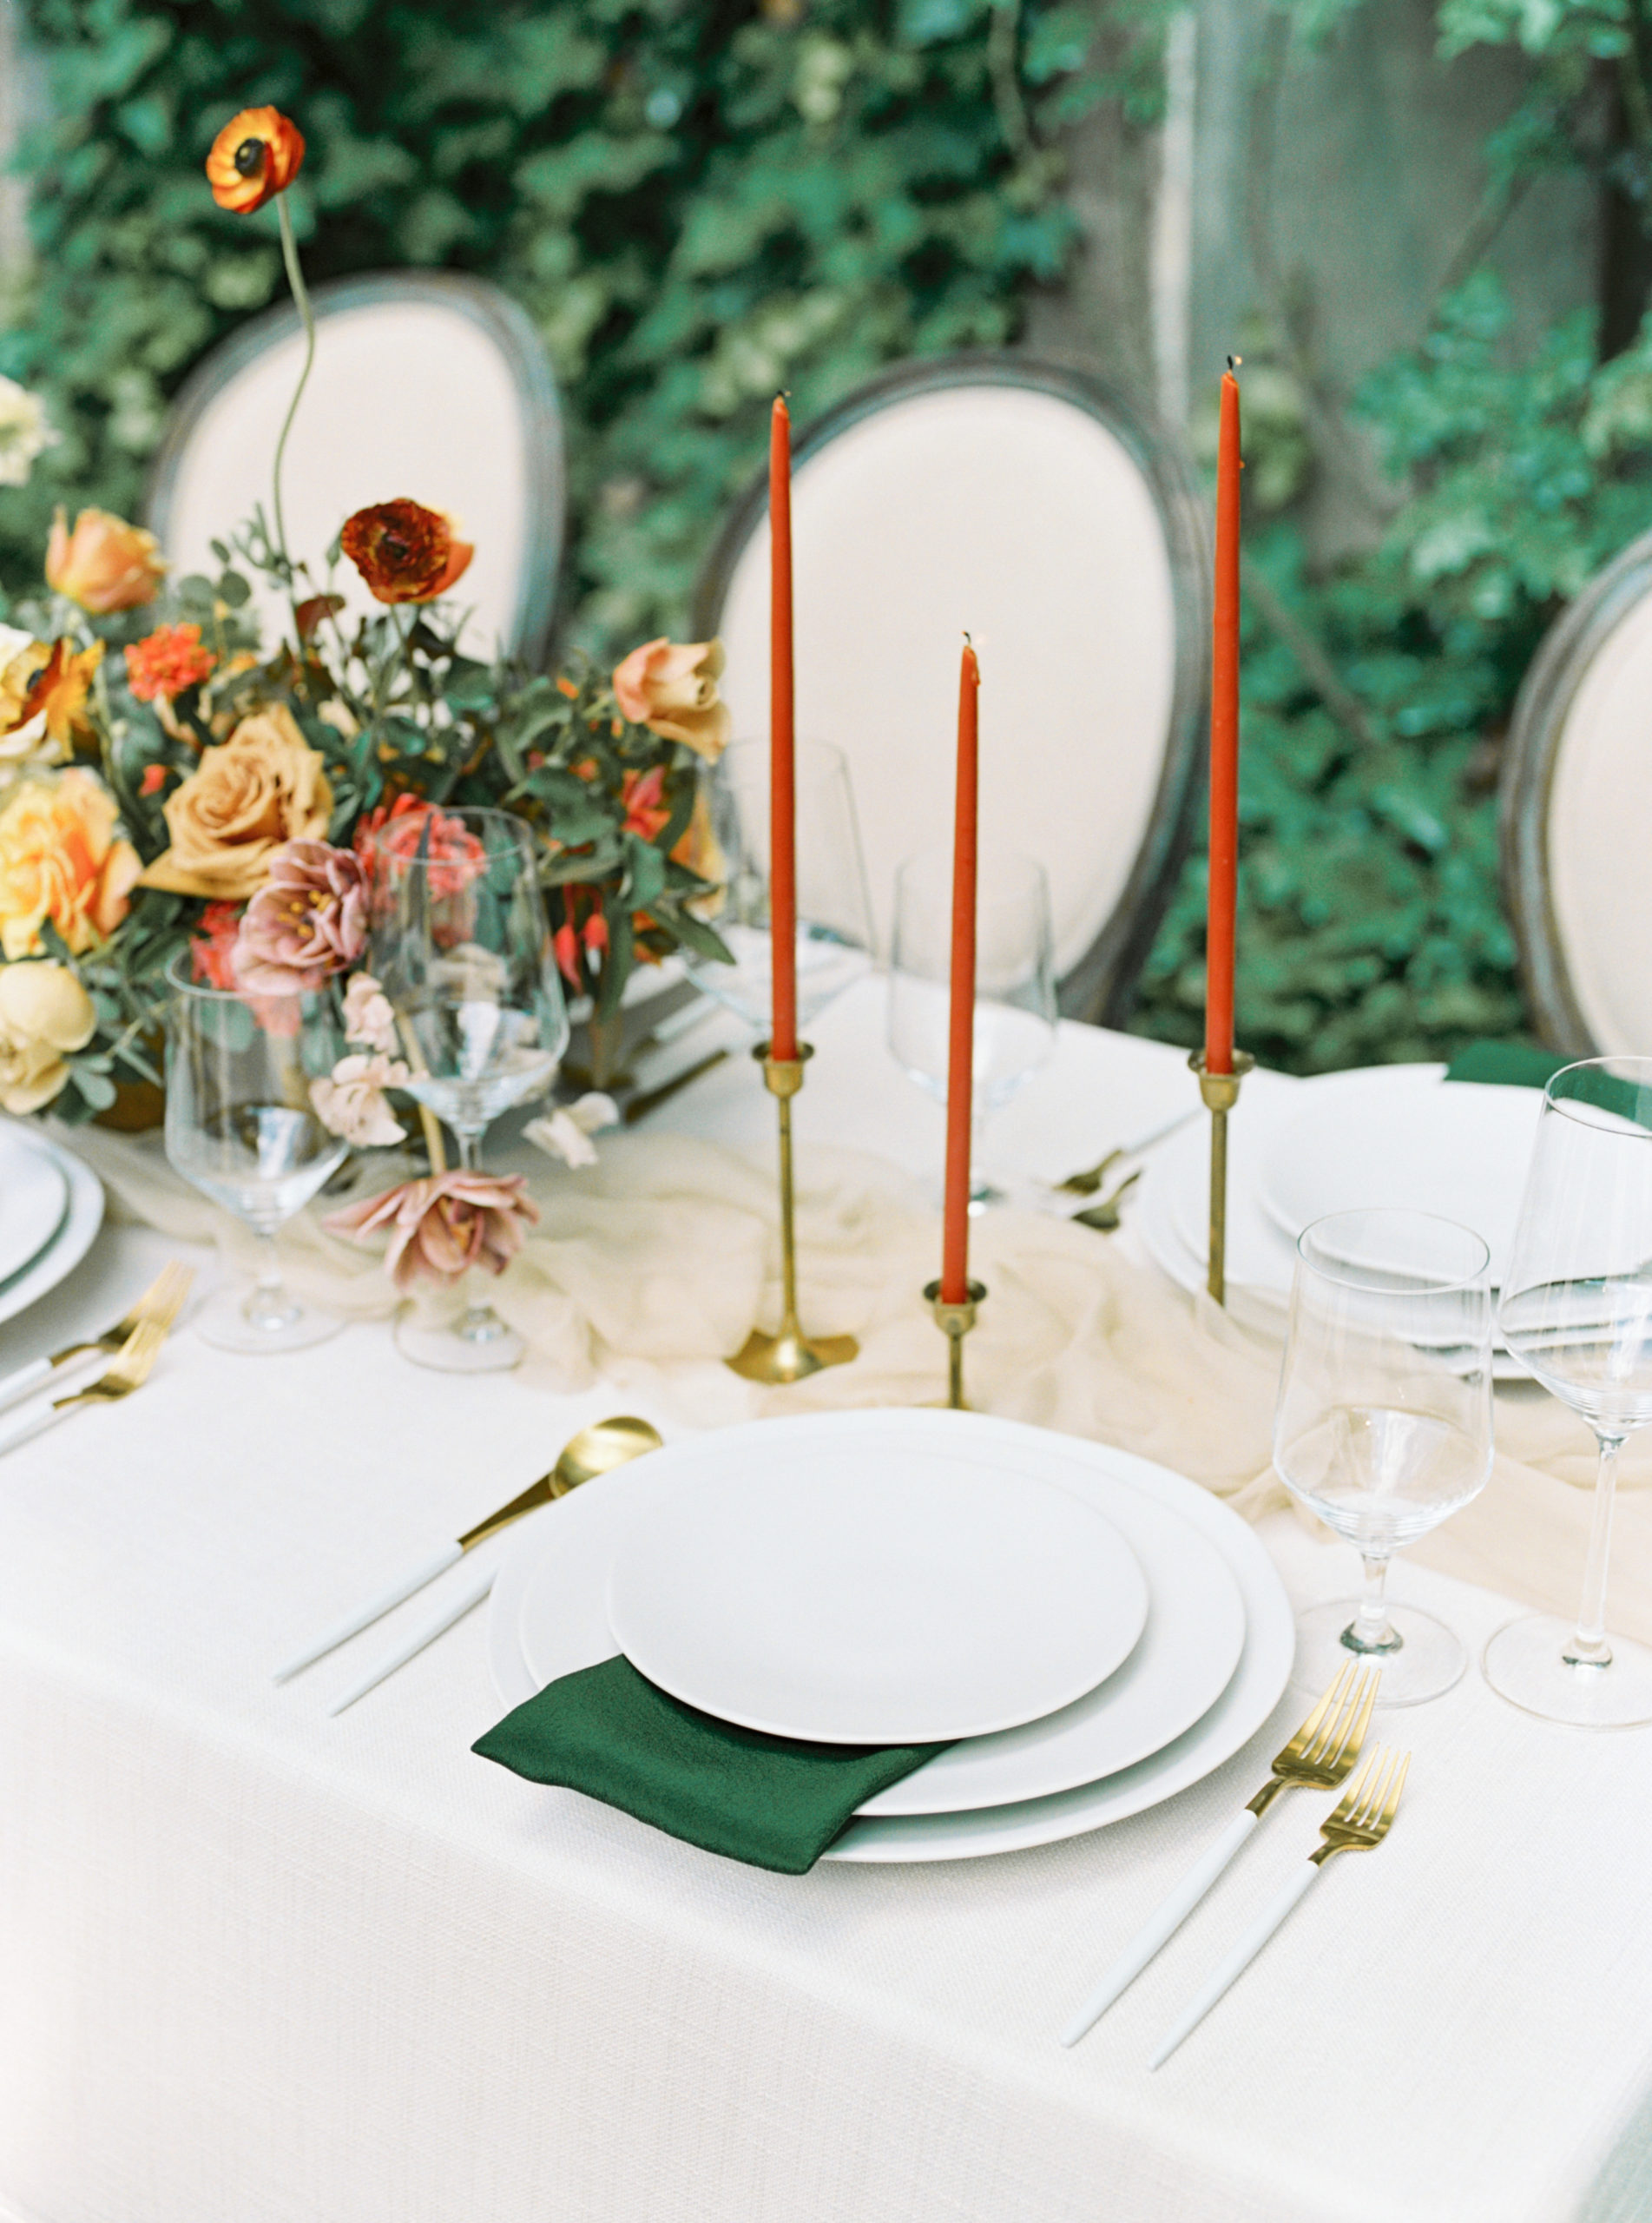 Thin, orange candle sticks on a white table scape with emerald napkins and gold and white flatware